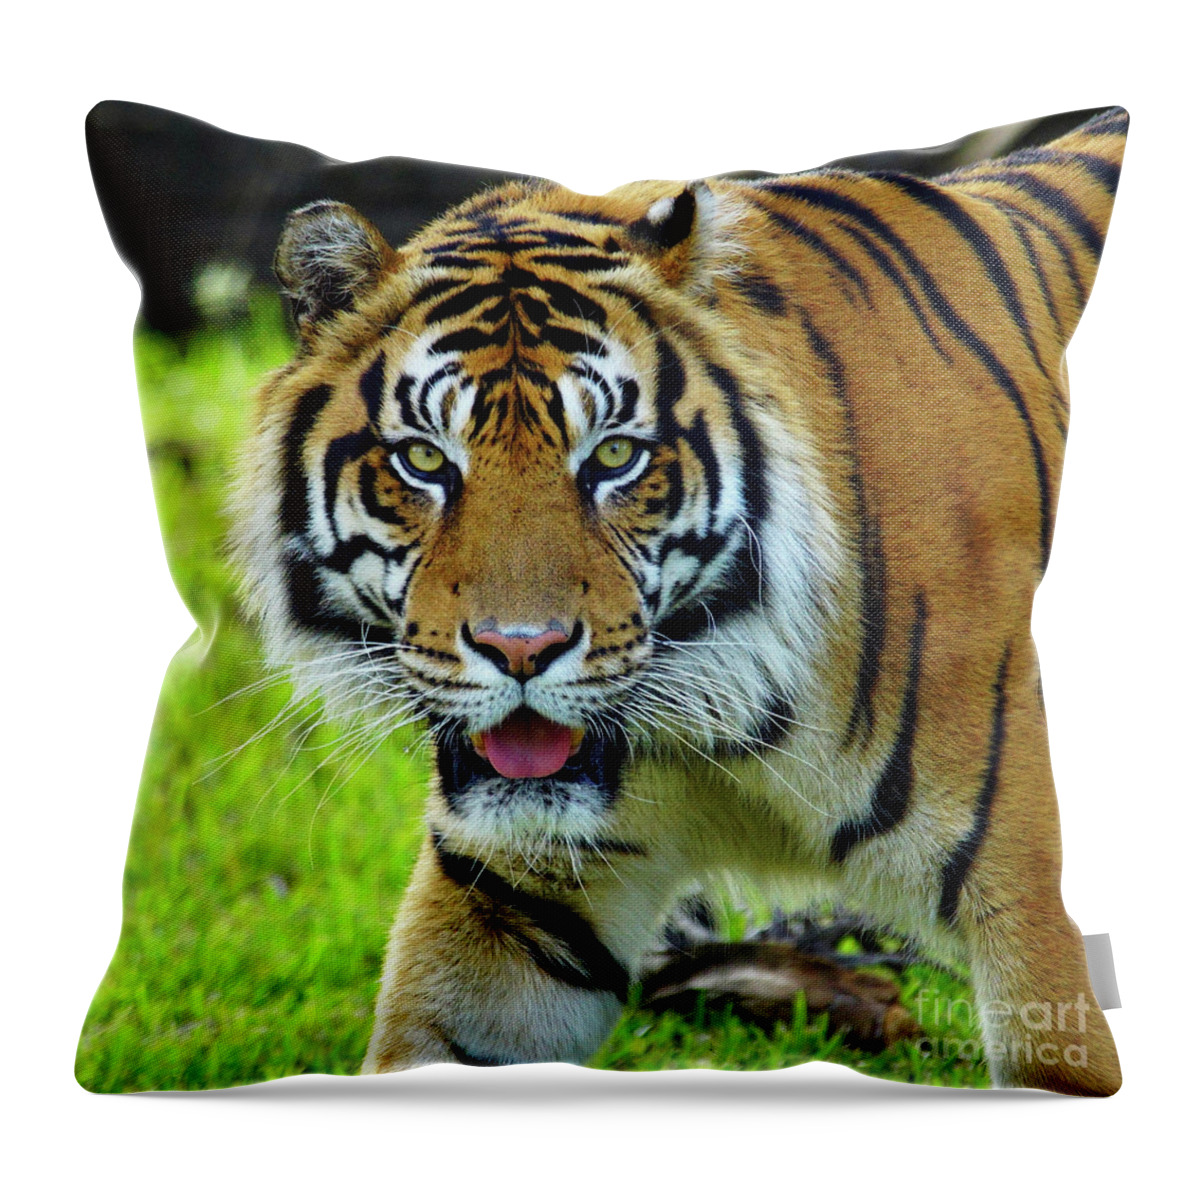 Tiger Throw Pillow featuring the photograph Tiger The Stare by Larry Nieland